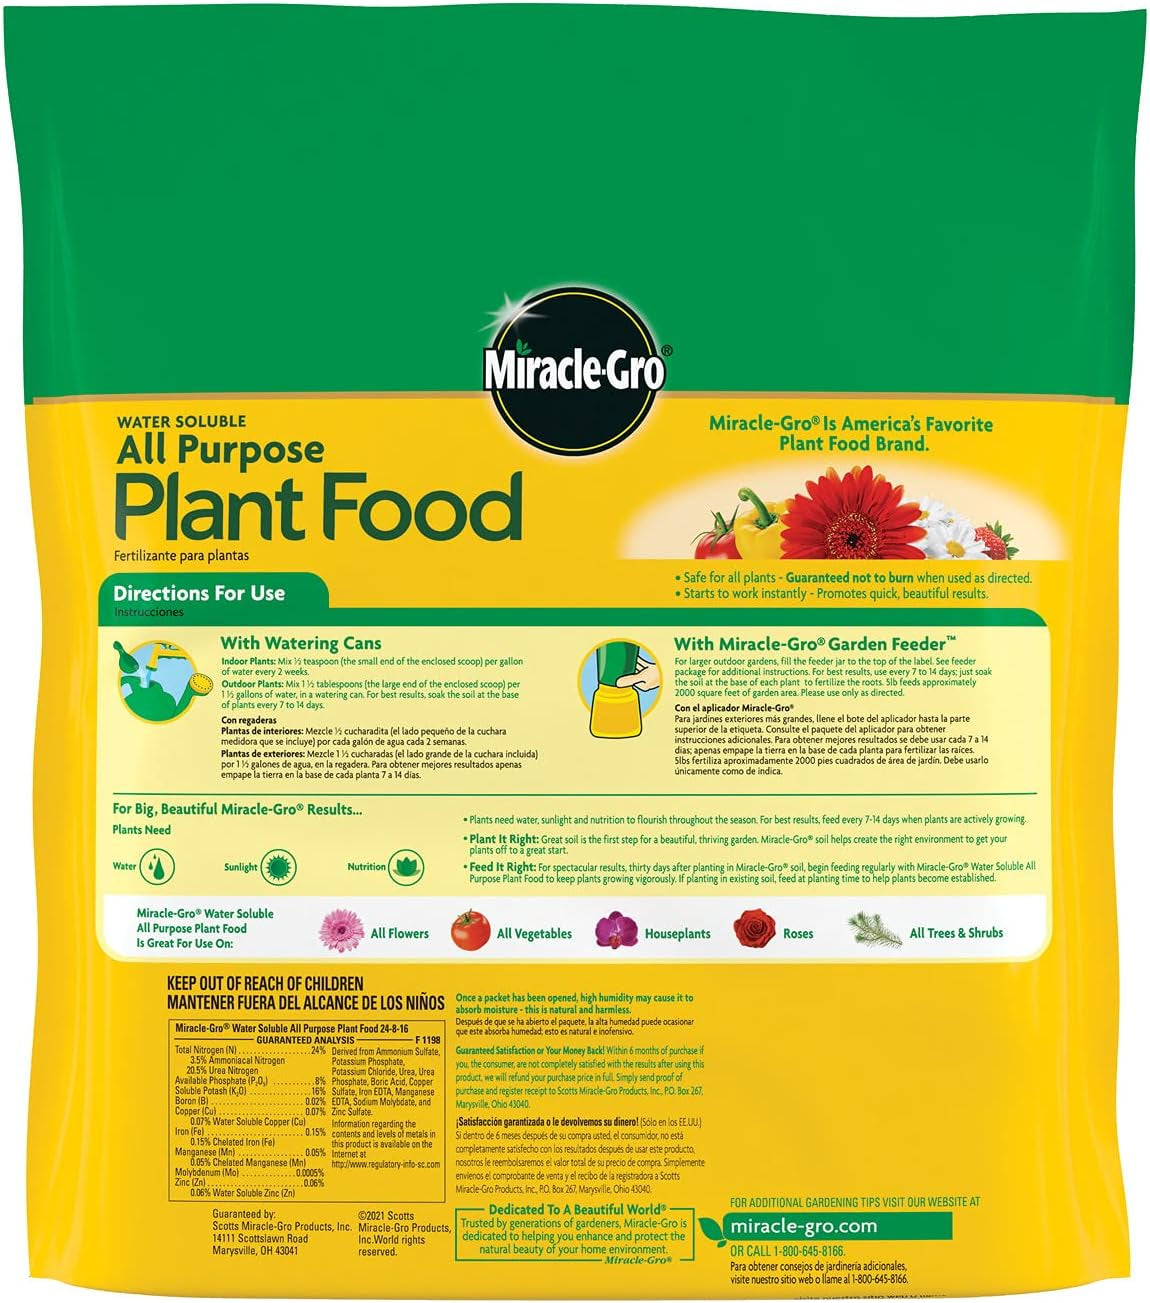 Water Soluble All Purpose Plant Food, 24-8-16, Instantly Fertilizes Plants, Waterproof Bag - 5 Lb.